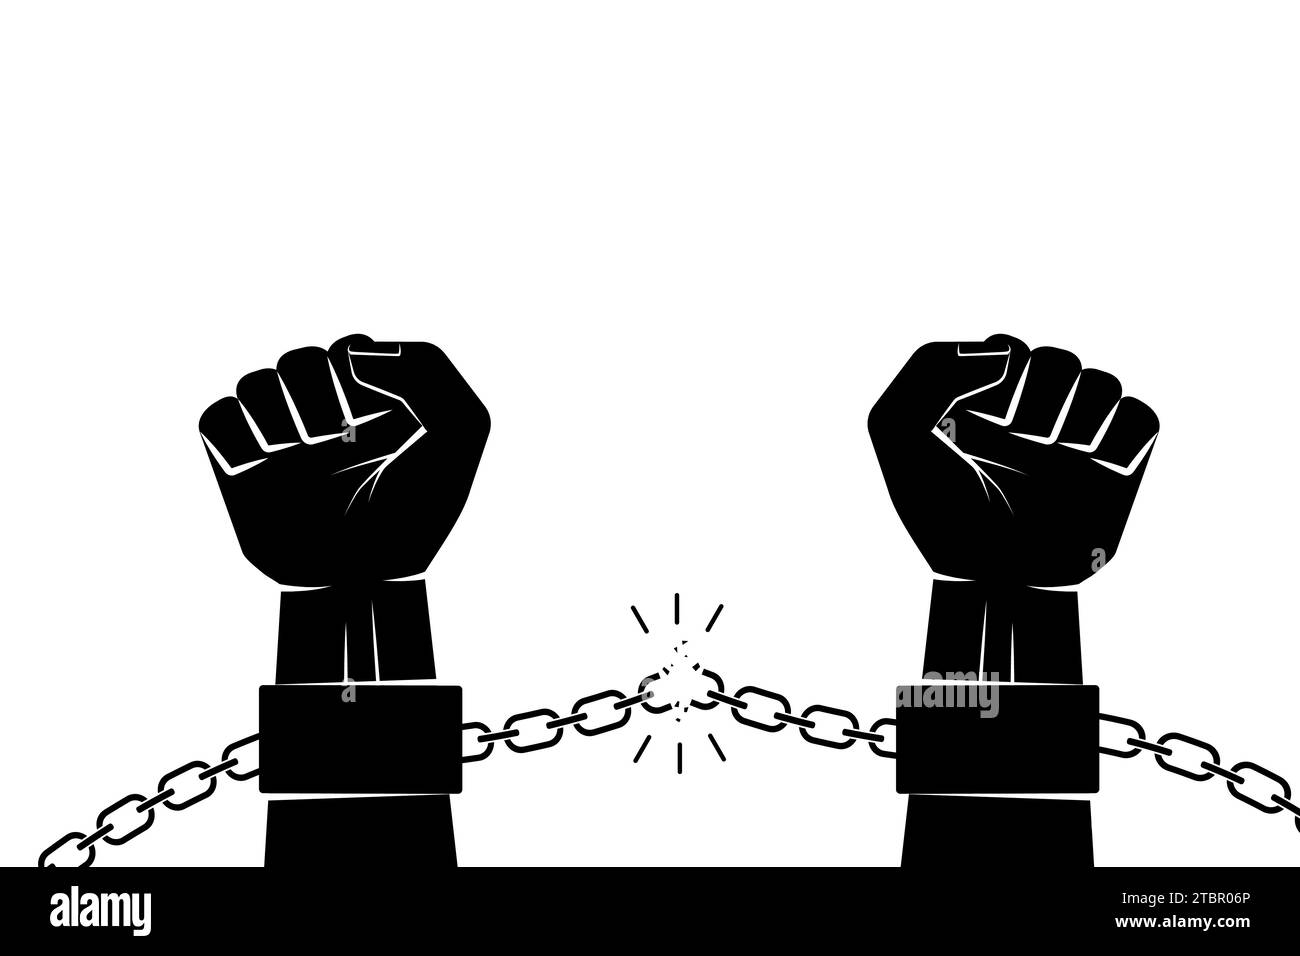 Hand in shackles broken chain. The concept of freedom and human rights. Vector graphic illustration black silhouette Stock Vector